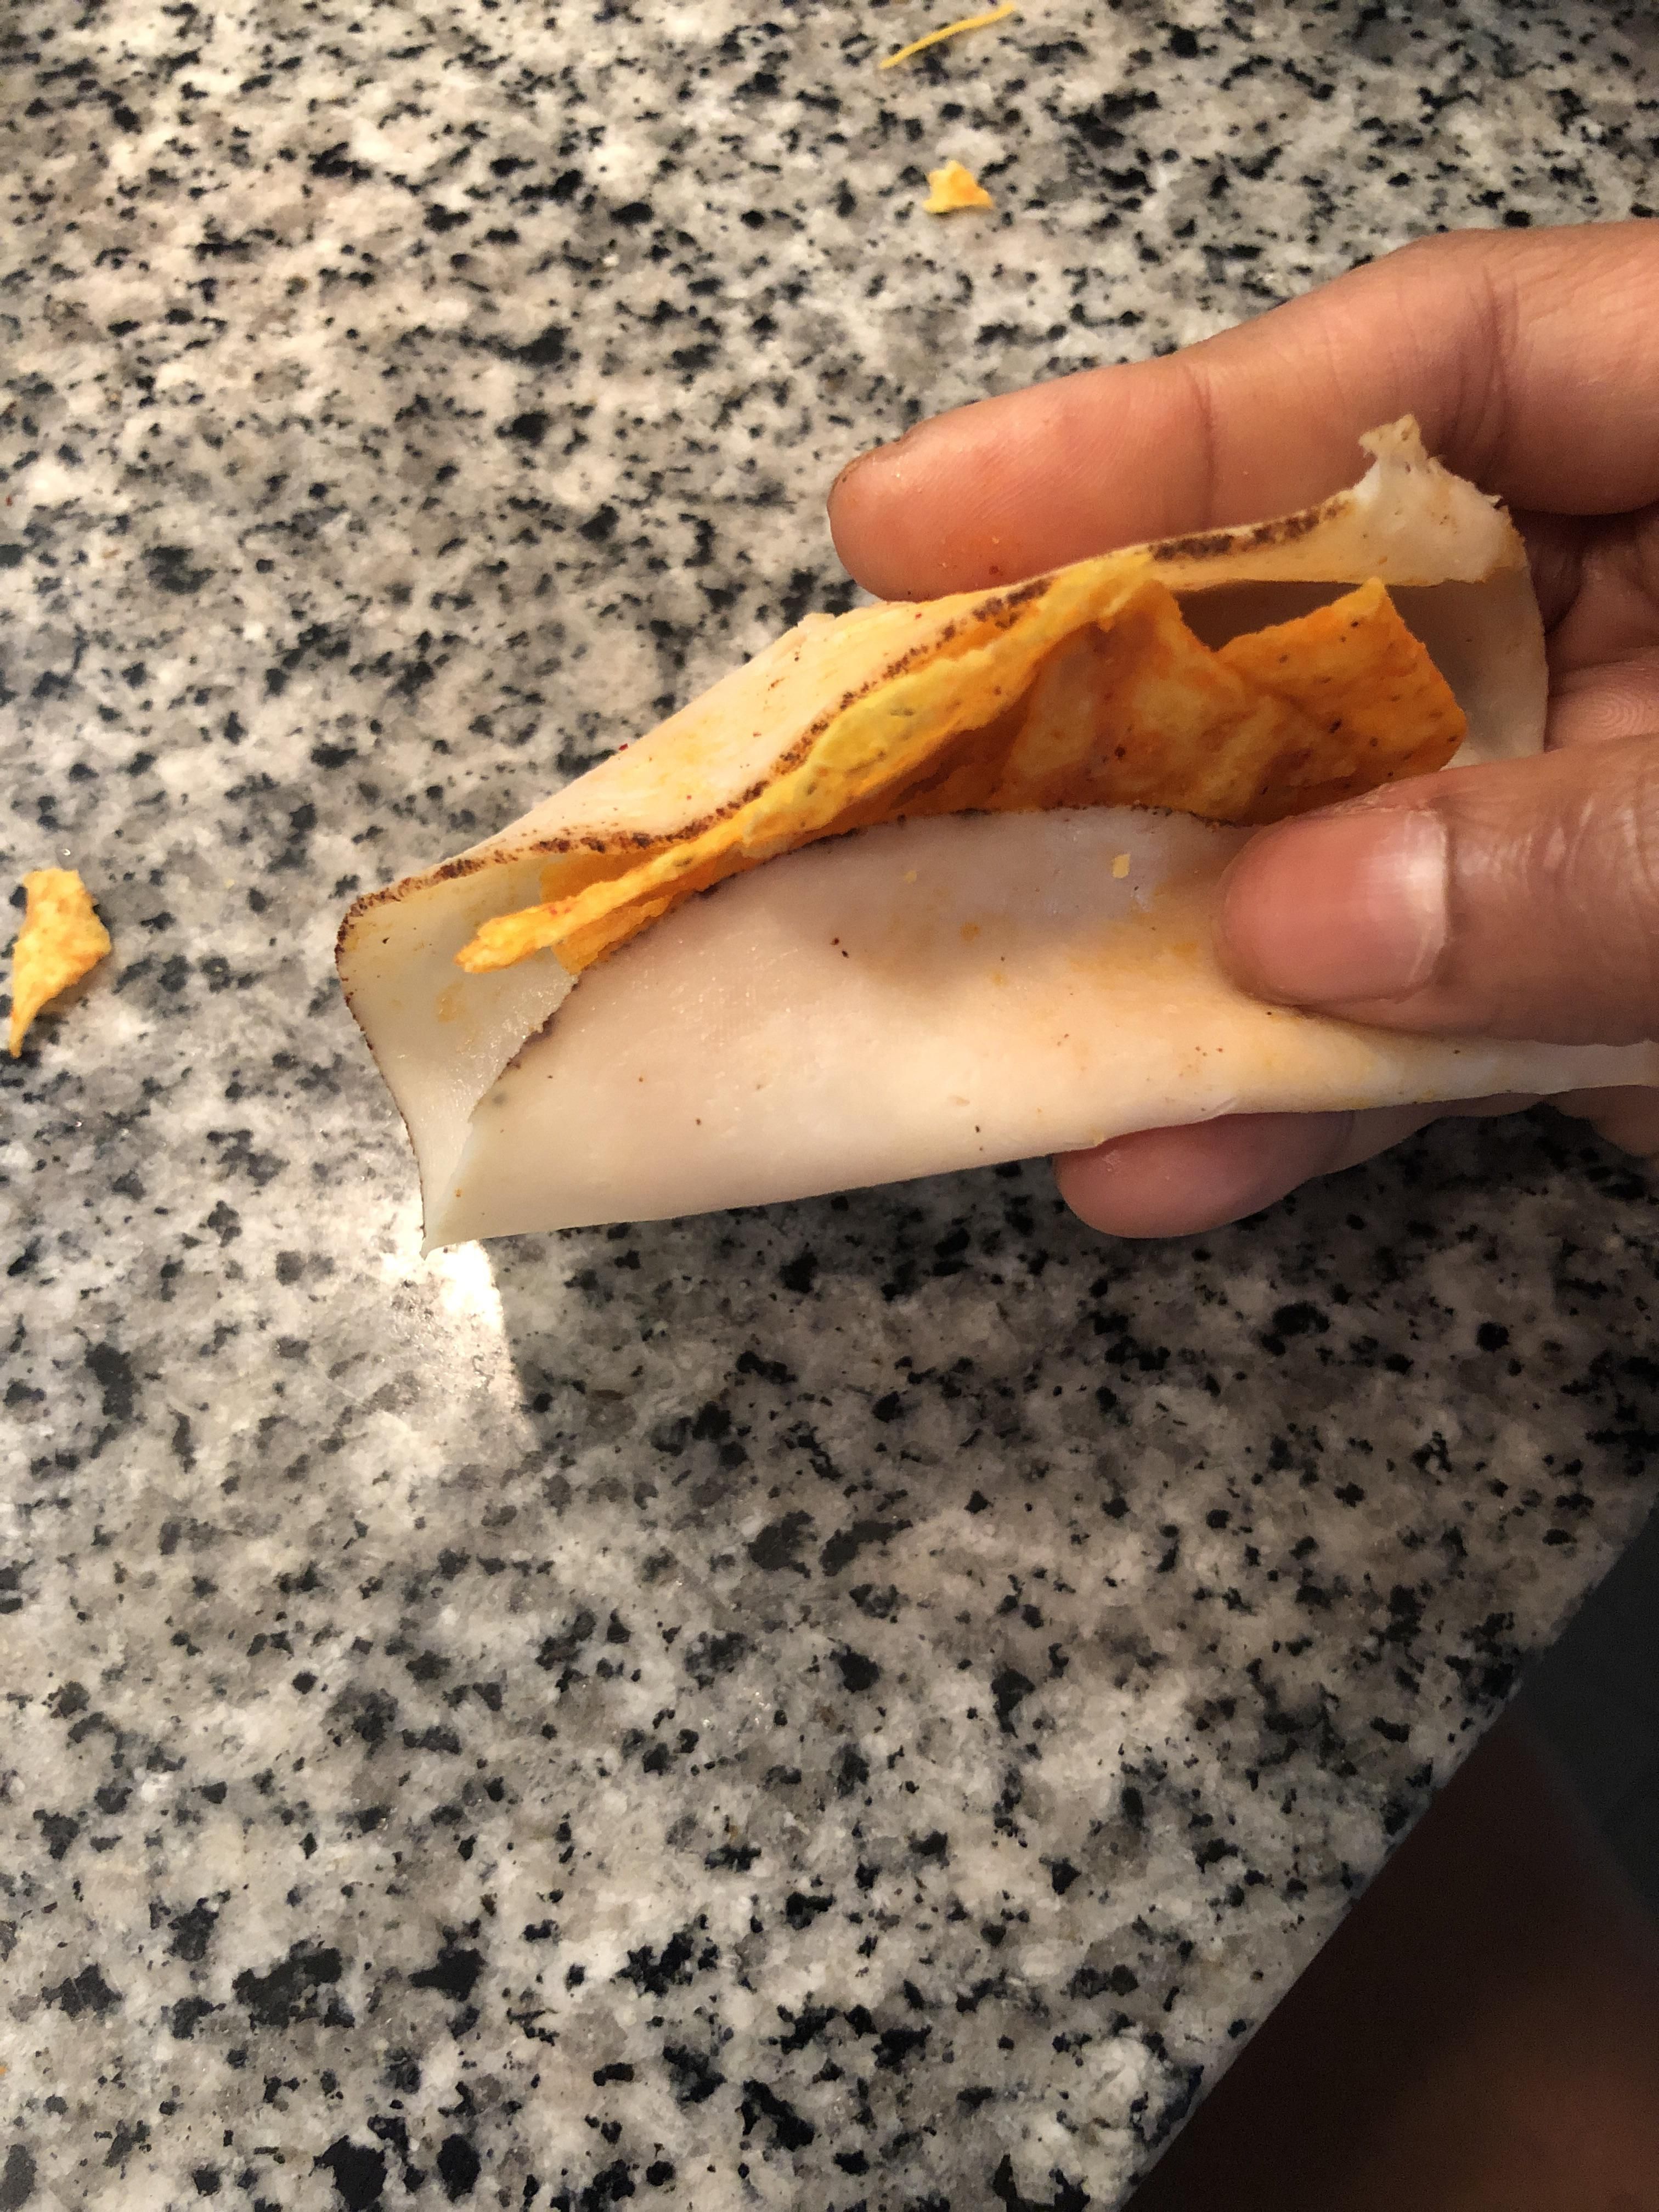 What’s it like to be single & 30 you ask? Well, today I ate Doritos wrapped in deli meat.